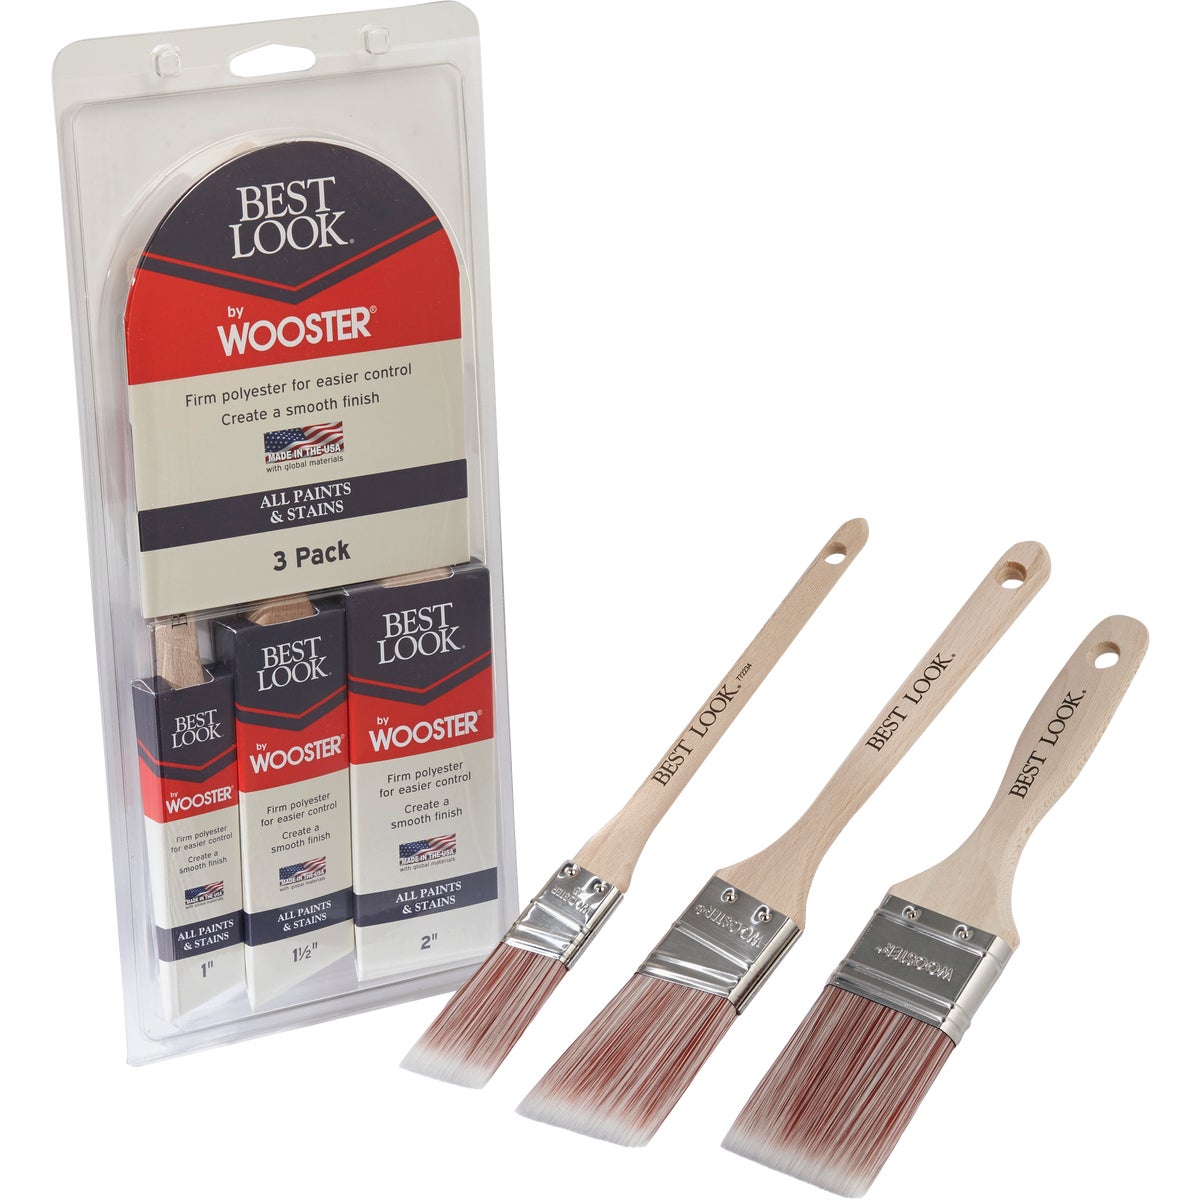 Item 772262, Best Look By Wooster 3-piece paint brush set includes: 1 In.